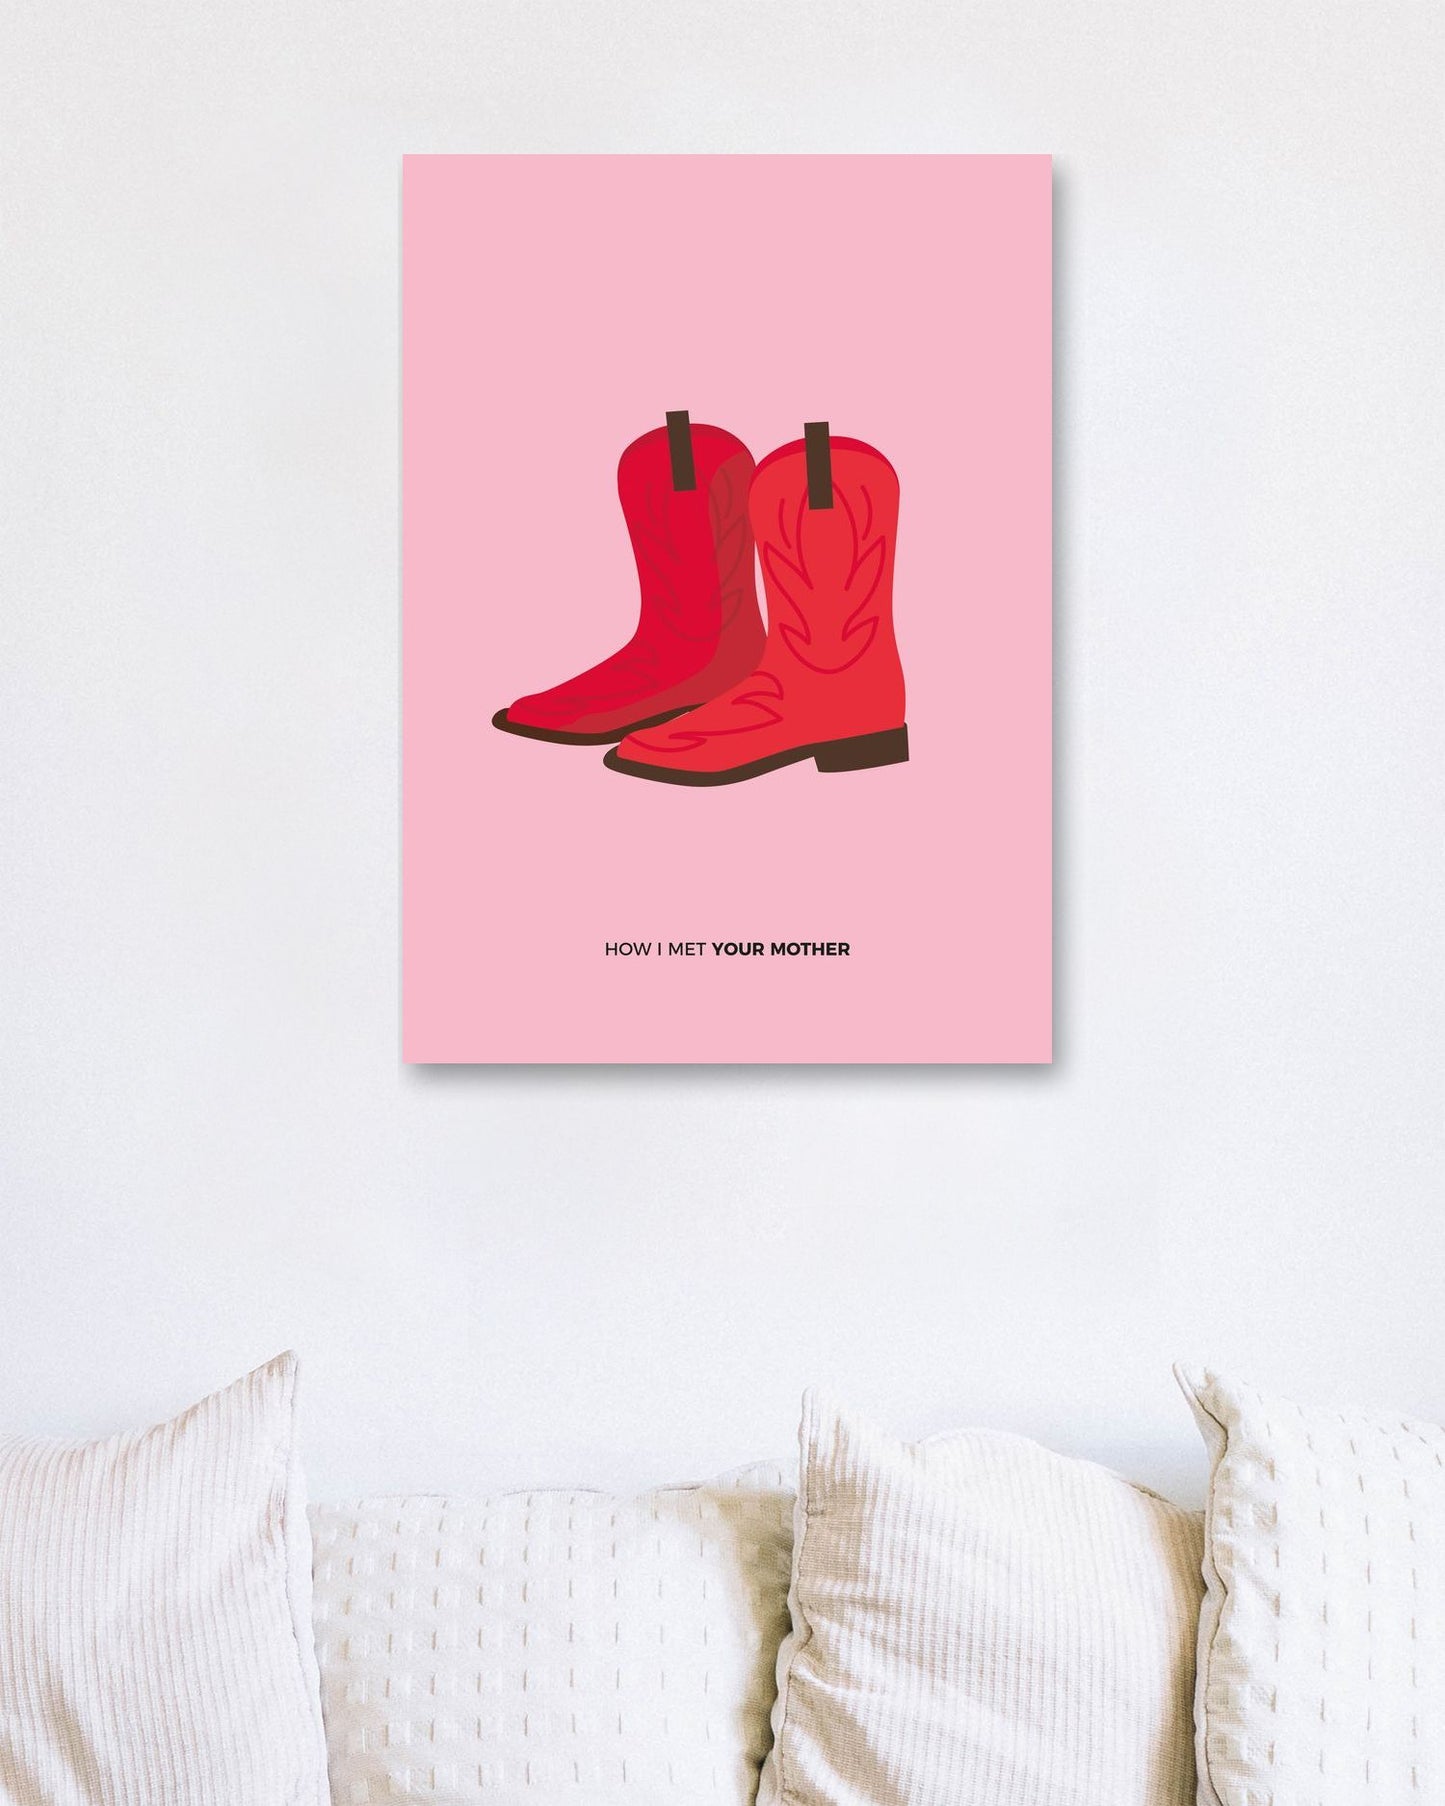 How i met your red boots - @donluisjimenez